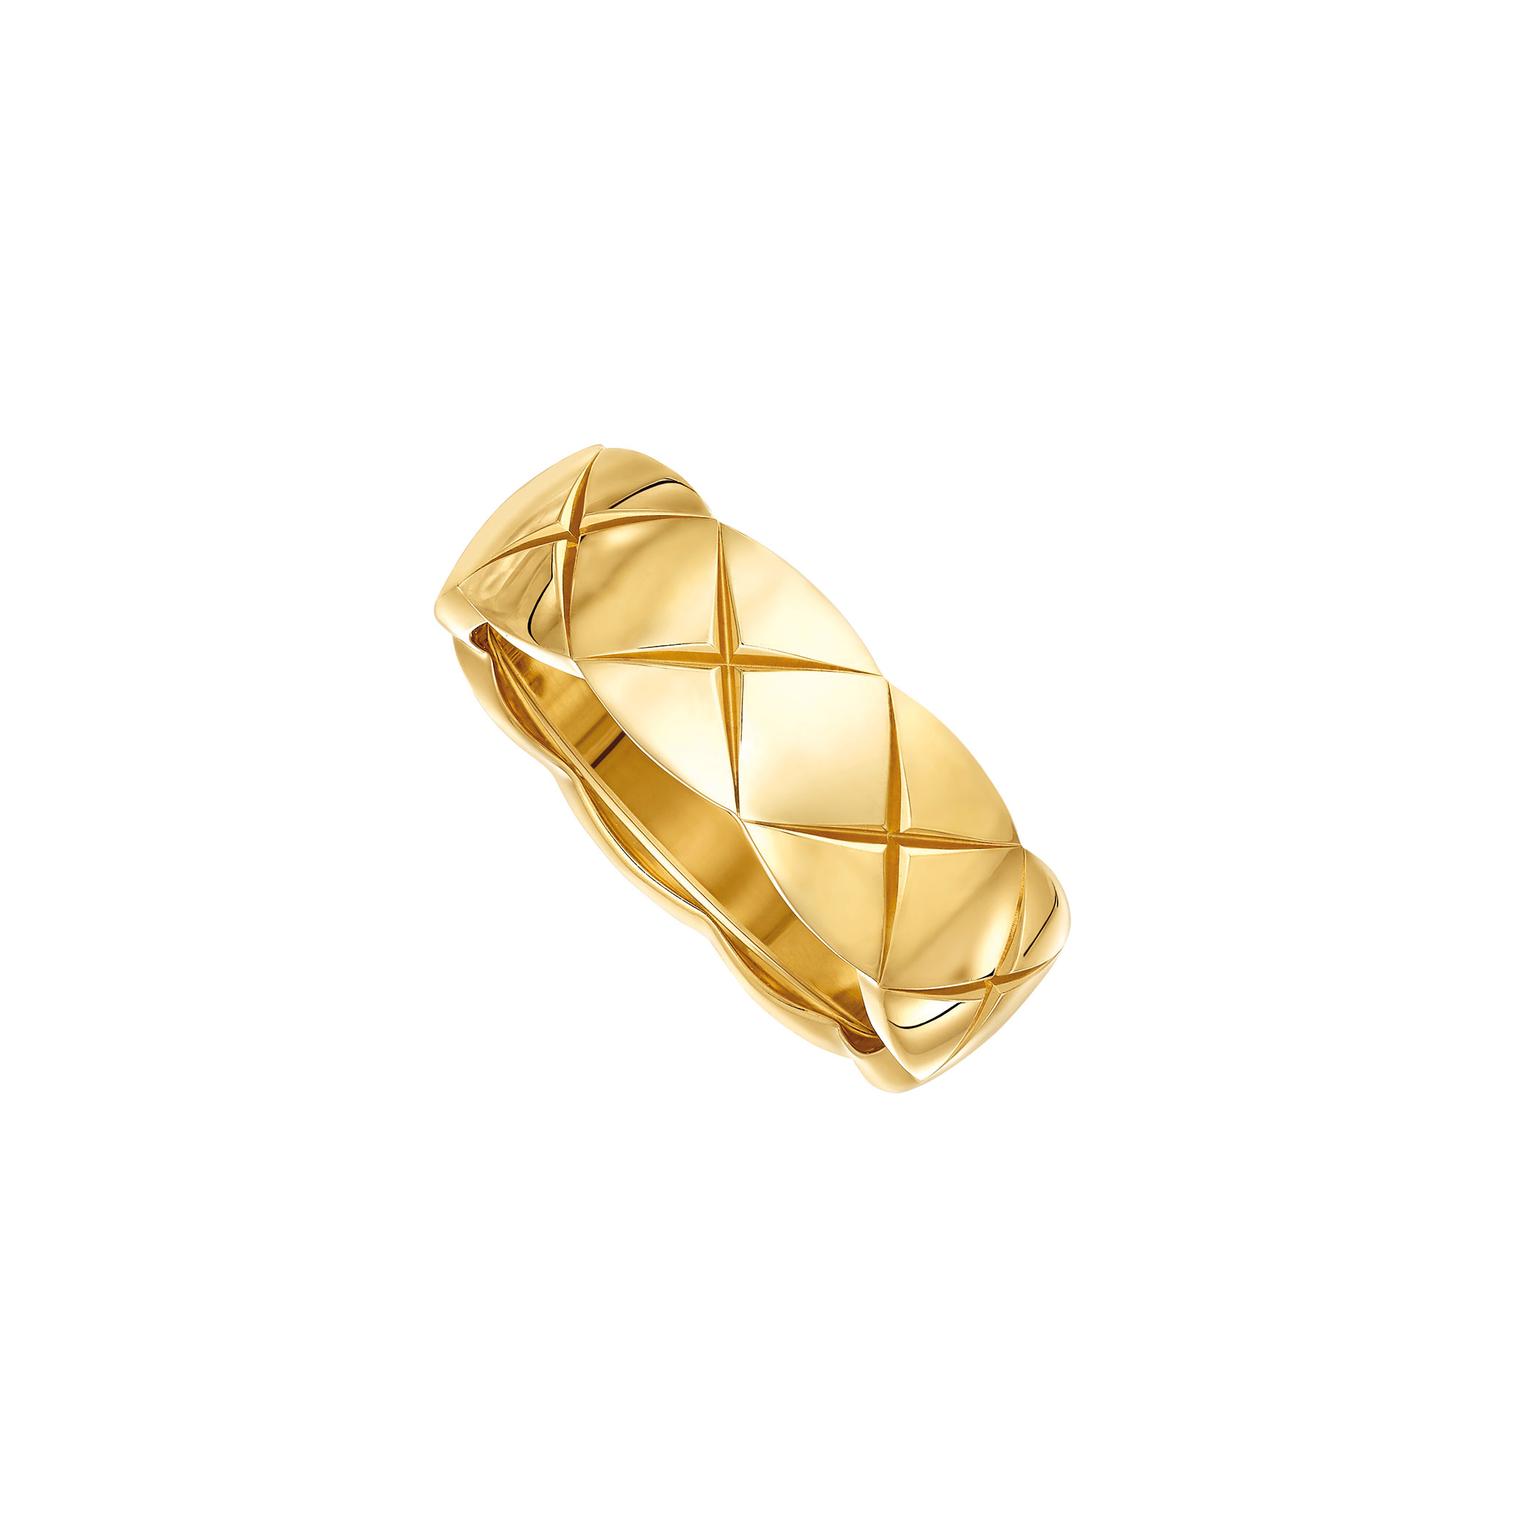 Small Coco Crush gold ring | Net-a-Porter | The Jewellery Editor